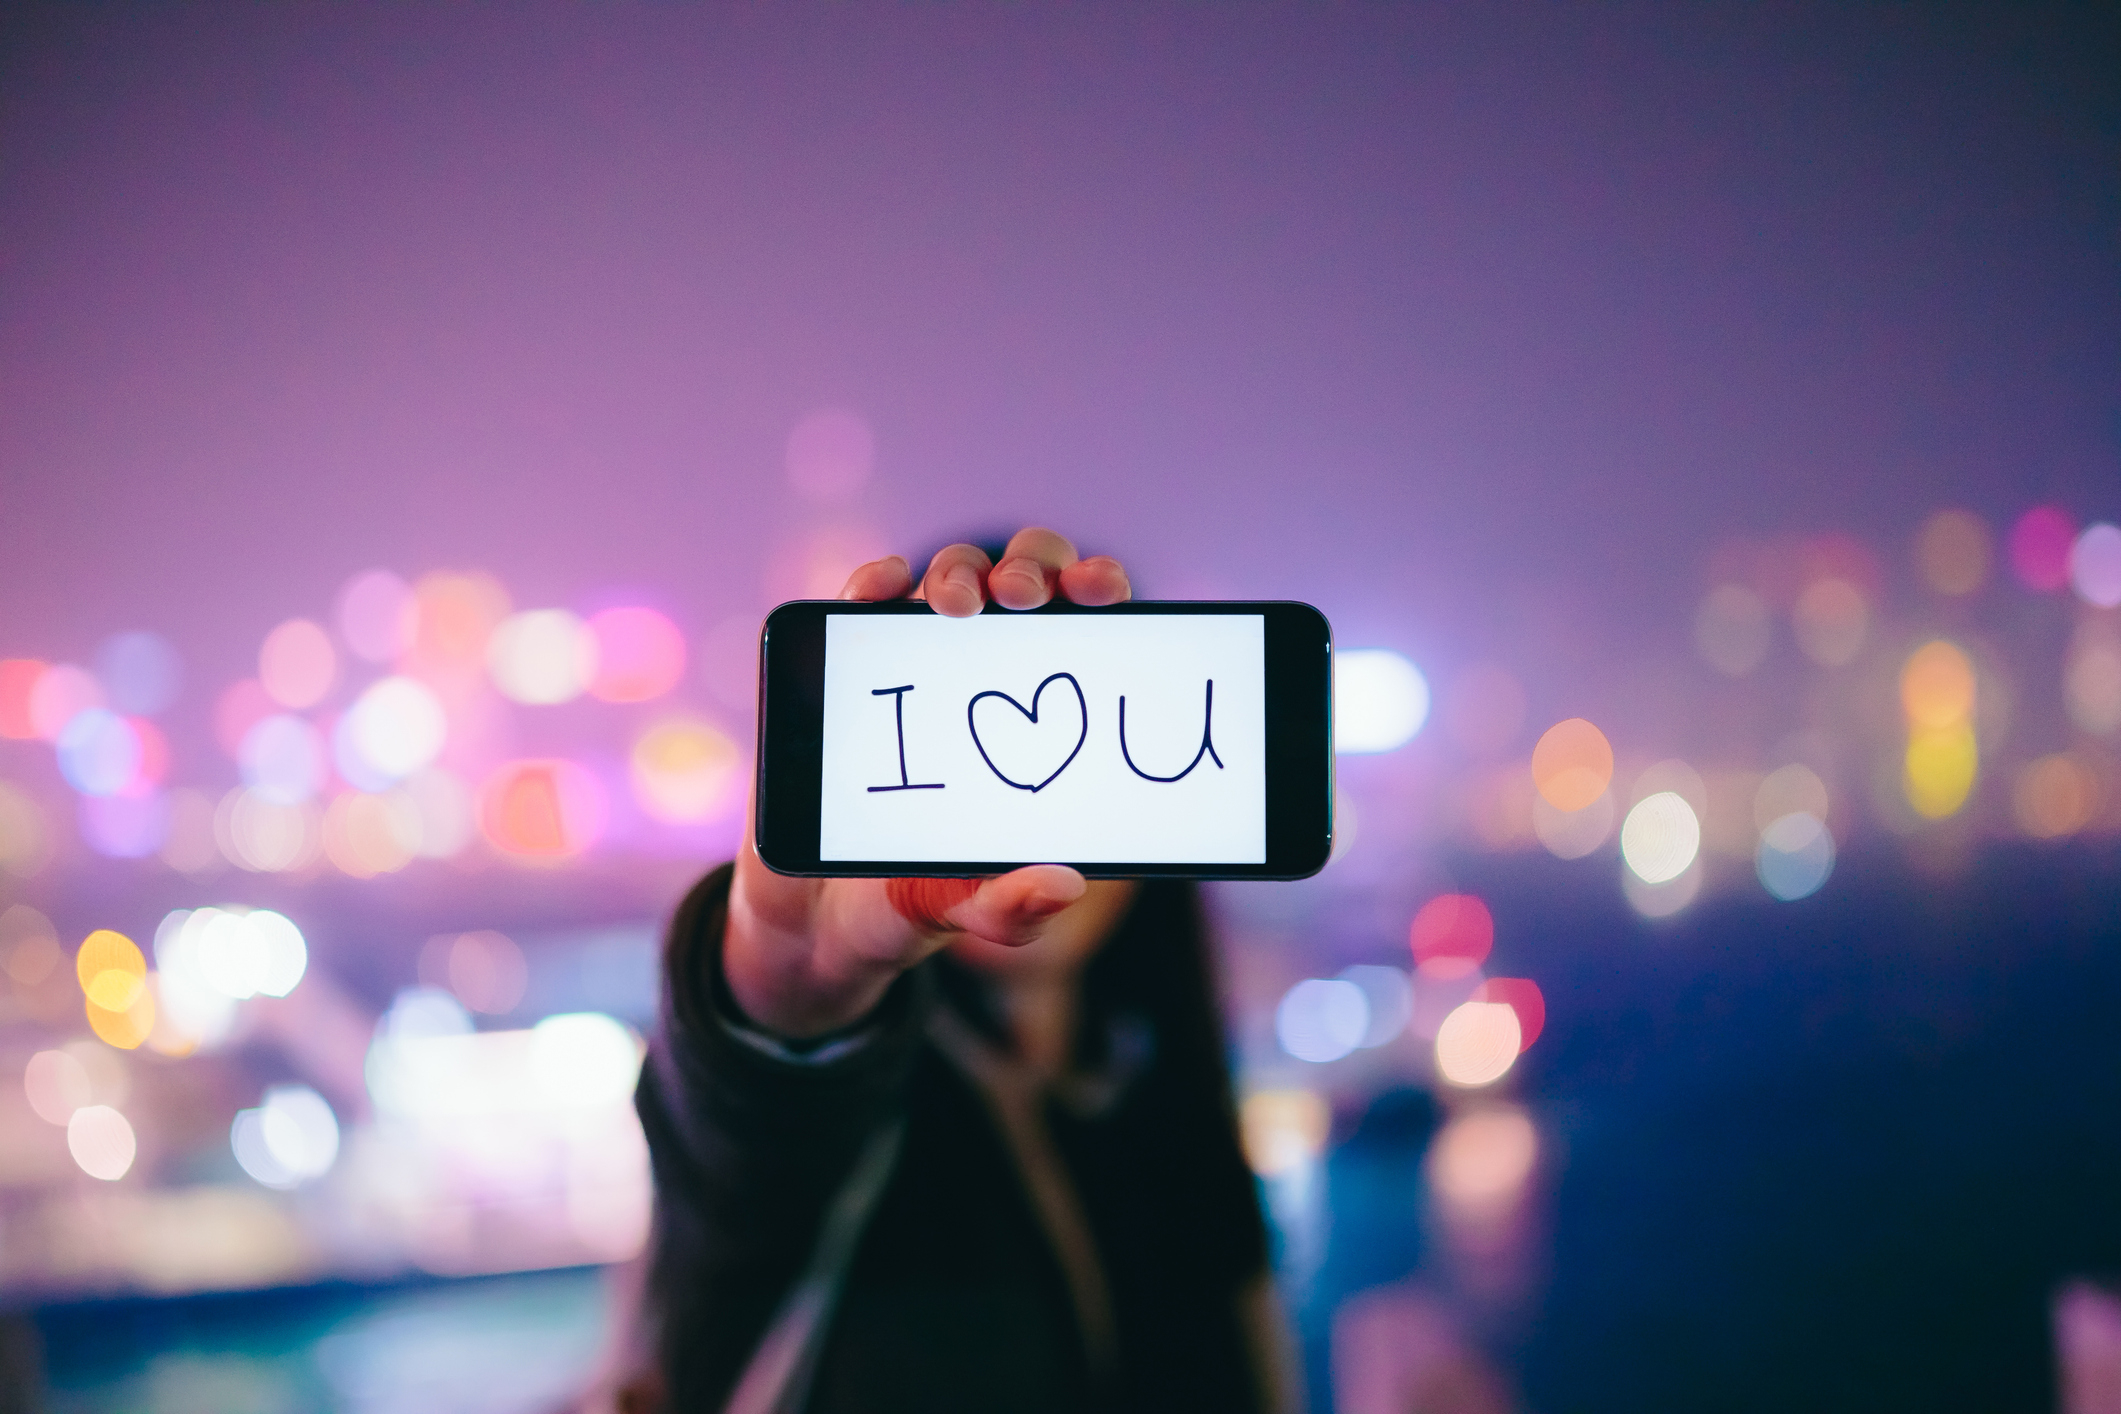 Hand holding smartphone with &quot;I ❤ U&quot; on screen, blurred city lights backdrop